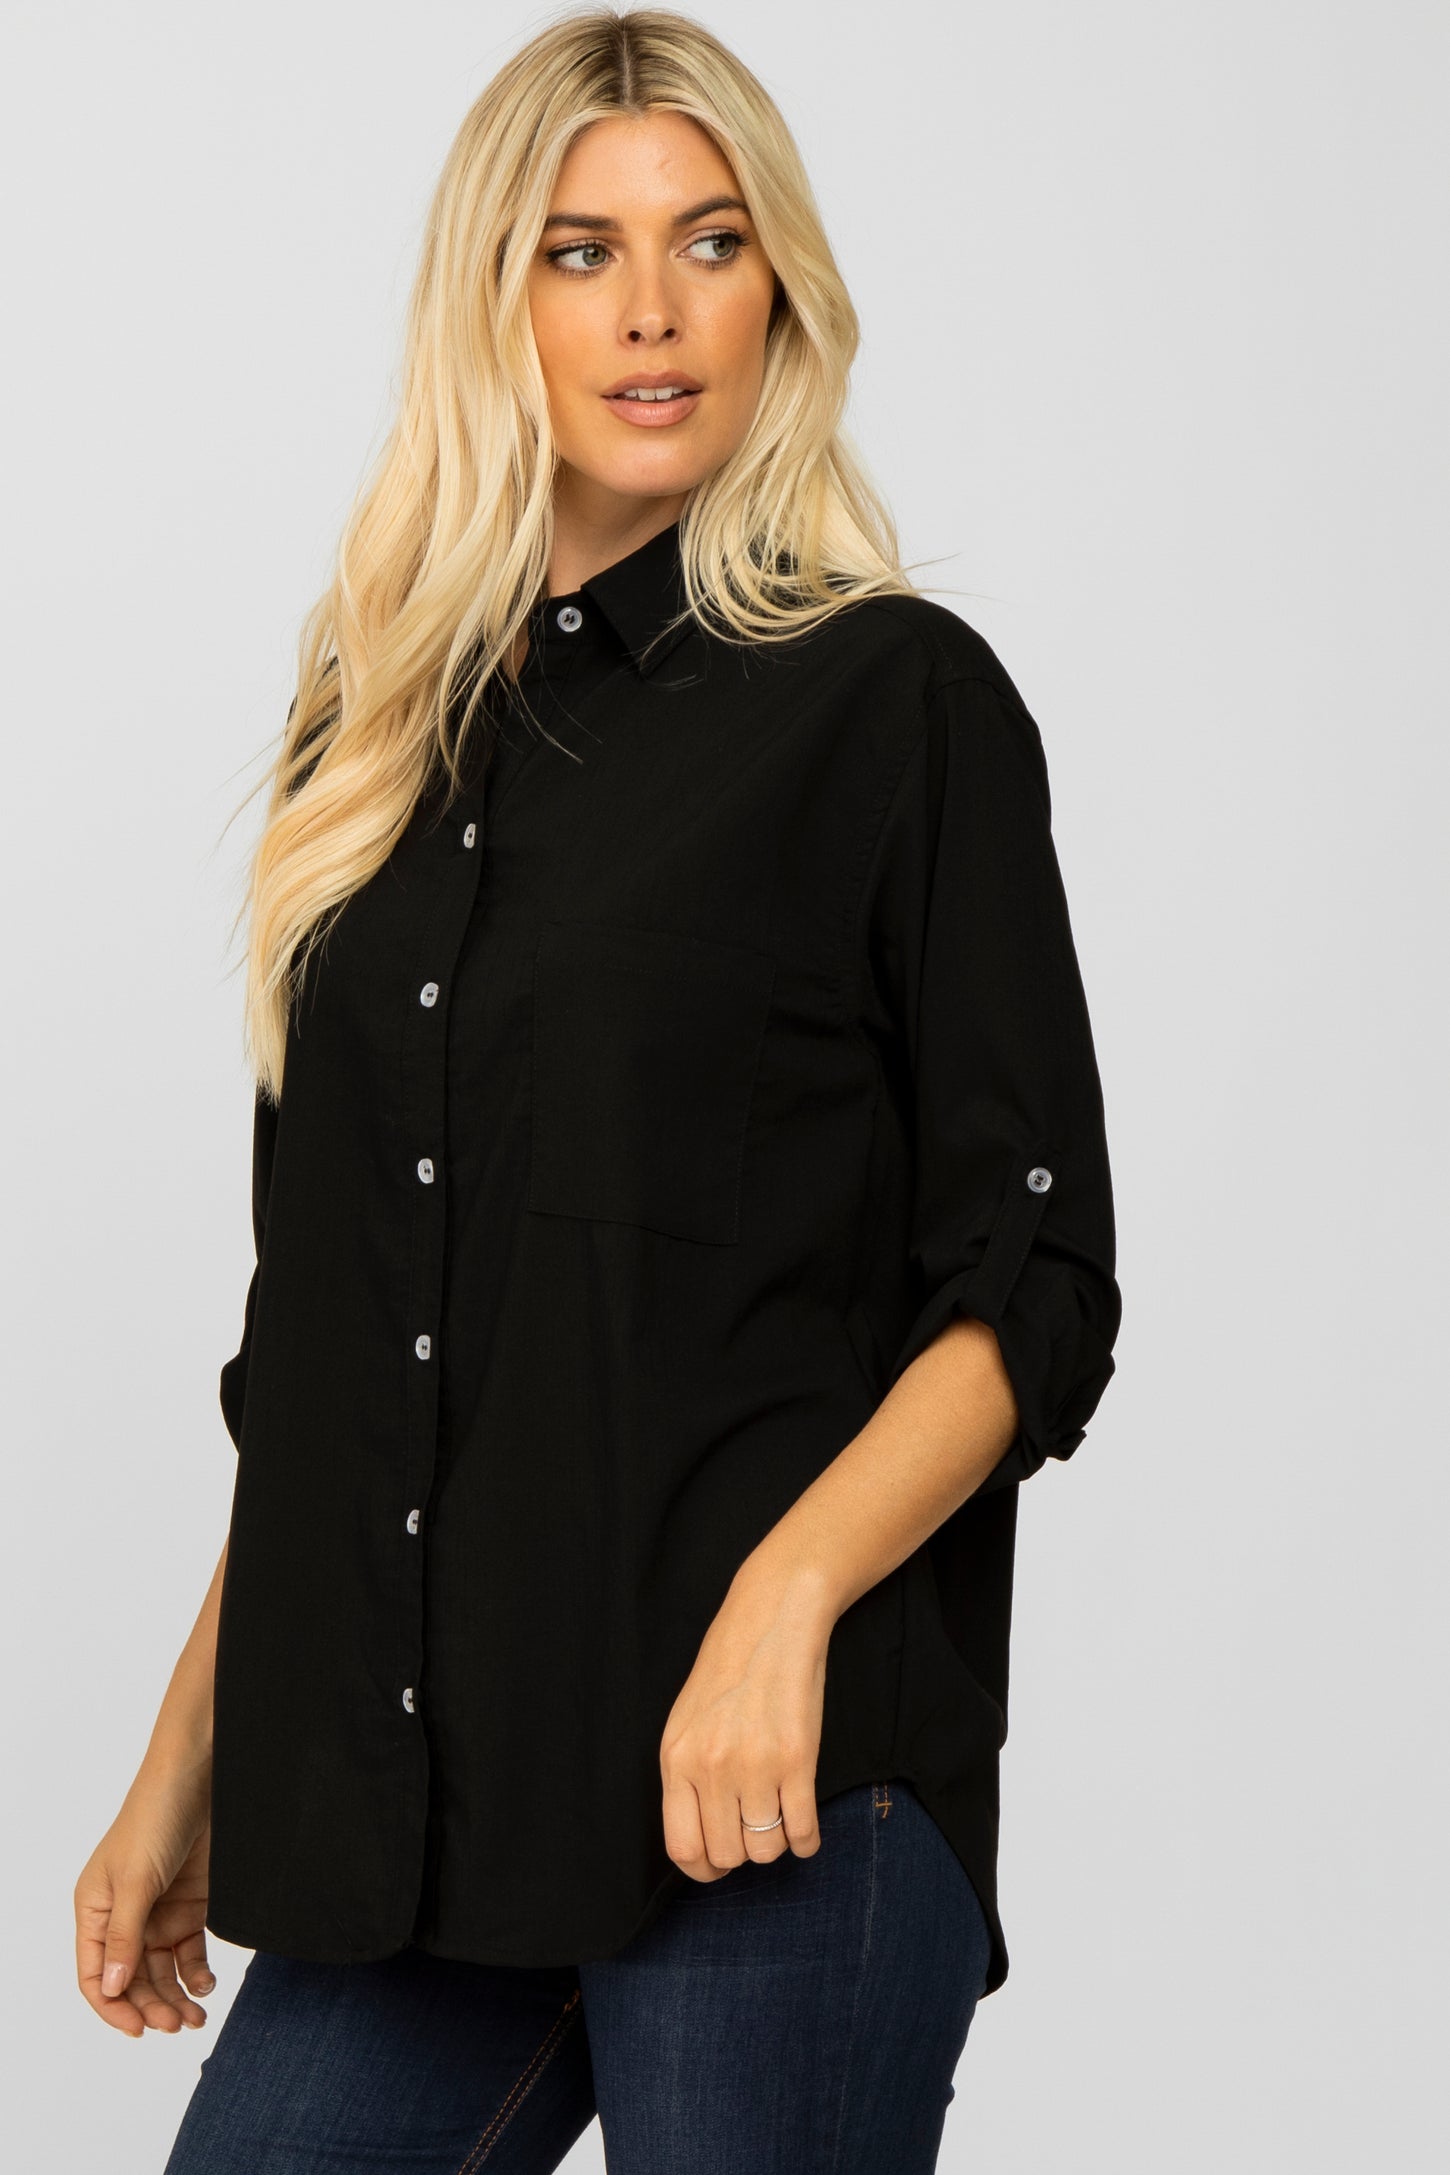 Black Hi Low Button Up Collared Top